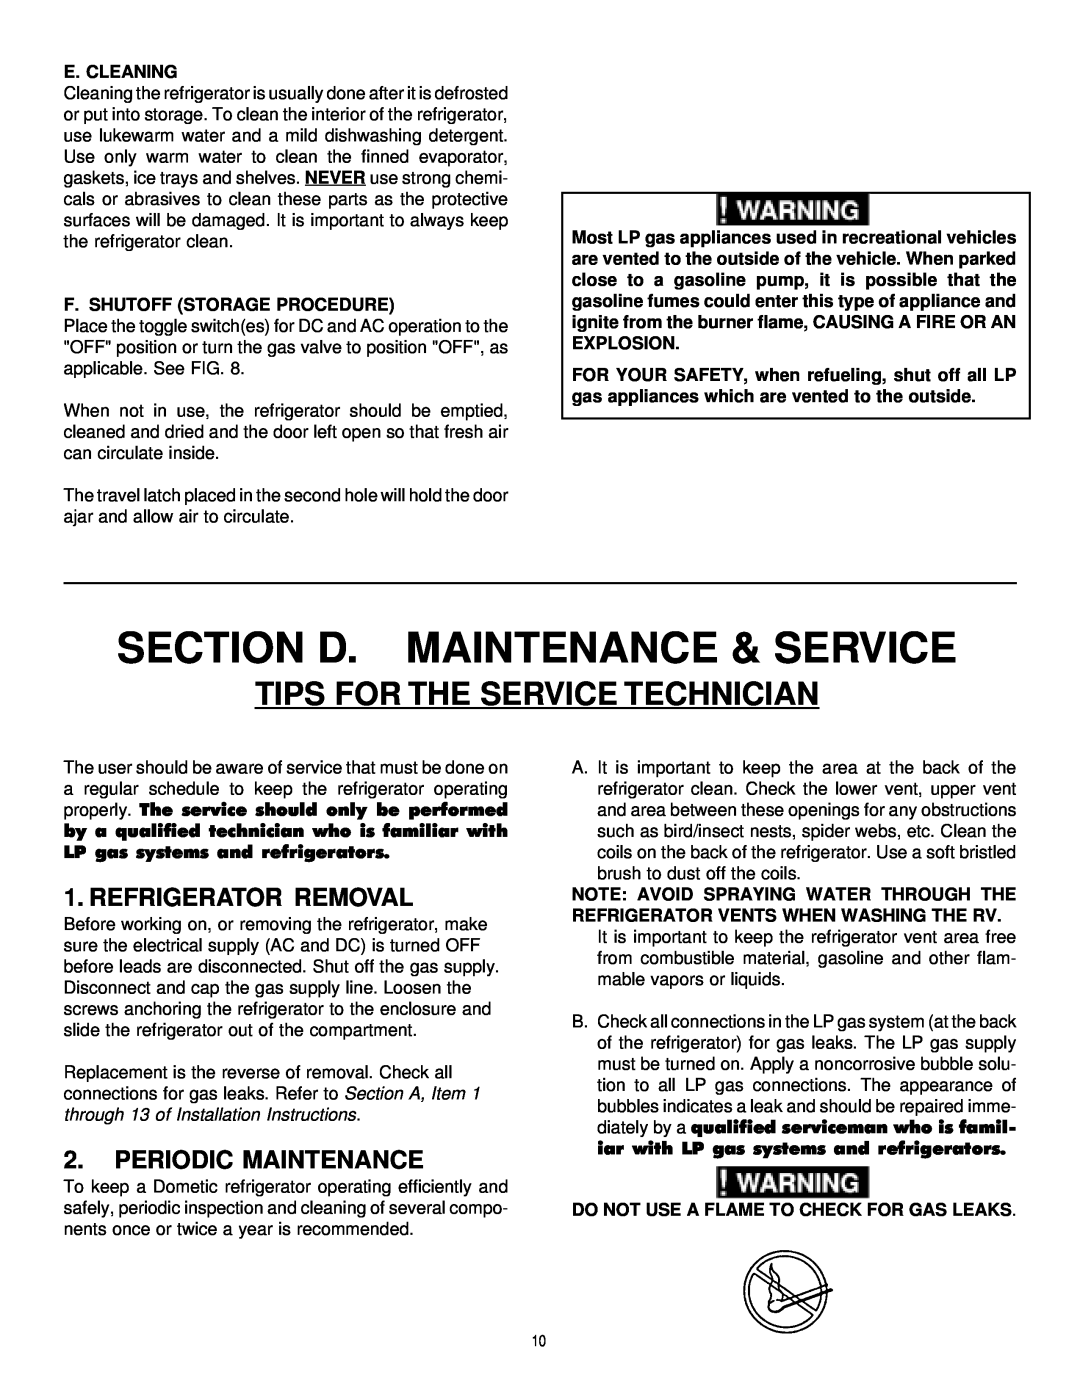 Dometic RM2191 & RM2193 manual Section D. Maintenance & Service, Tips For The Service Technician, Refrigerator Removal 